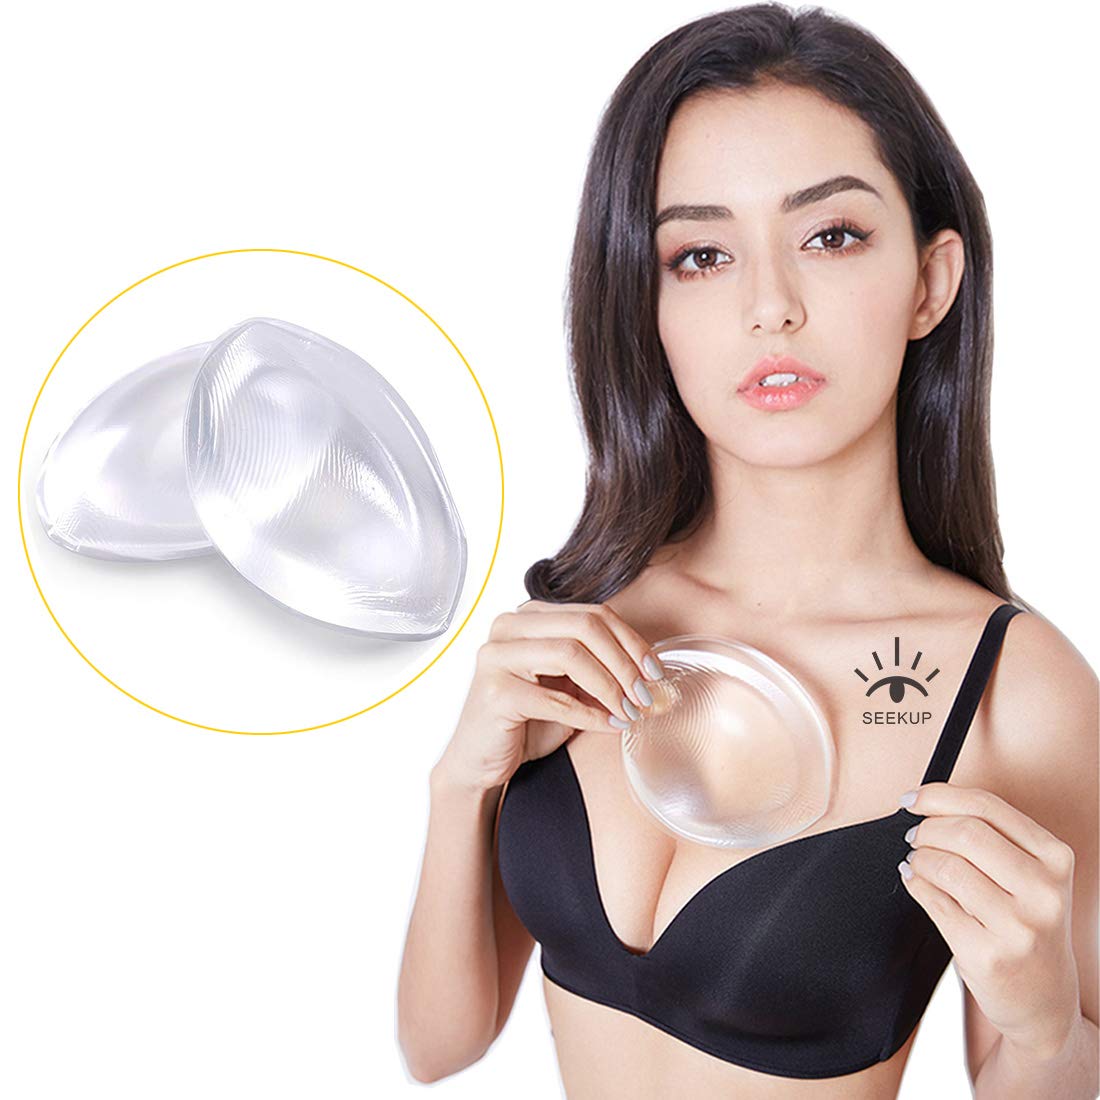 SEEKUP Women Silicone Bra Pads Inserts Breast Enhancer Swimsuits Enhancement Bust Push up Pads for A Cup, Transparent M